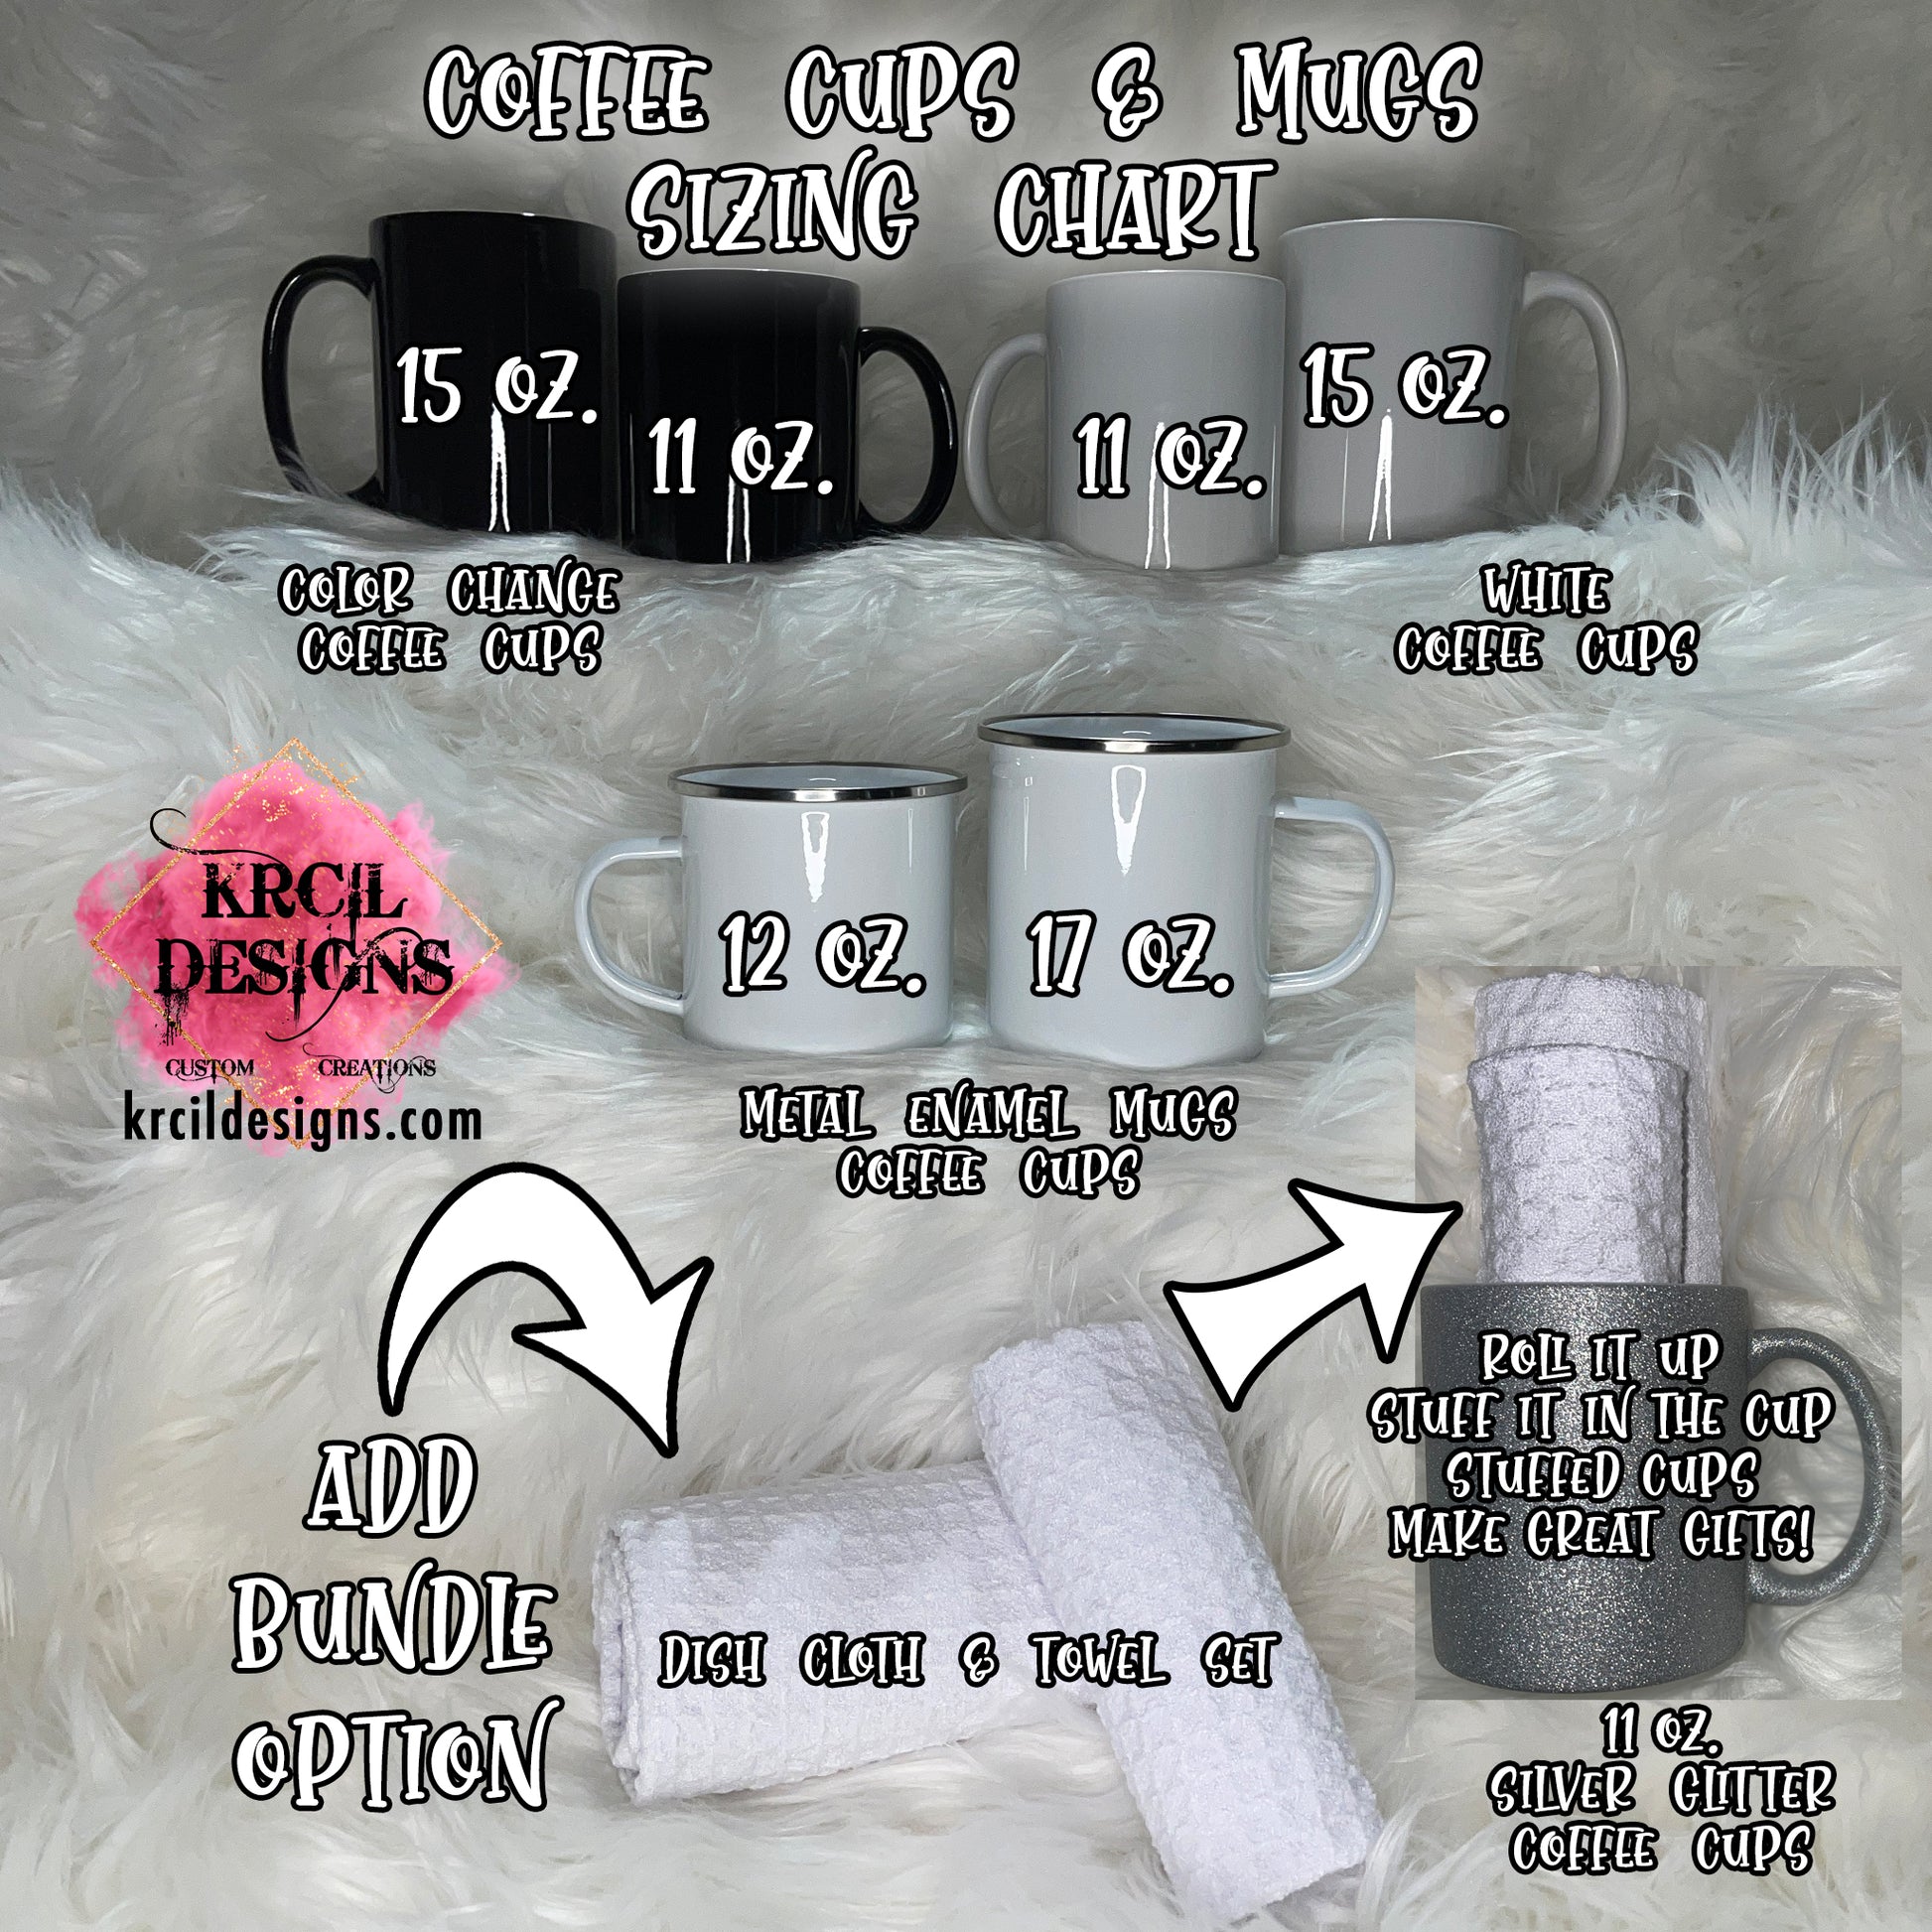 https://krcildesigns.com/cdn/shop/files/PICTURE-COLLAGE-PHOTO-COFFEE-CUPS-MUGS-SIZING-CHART-krcildesigns.com.jpg?v=1699823501&width=1946